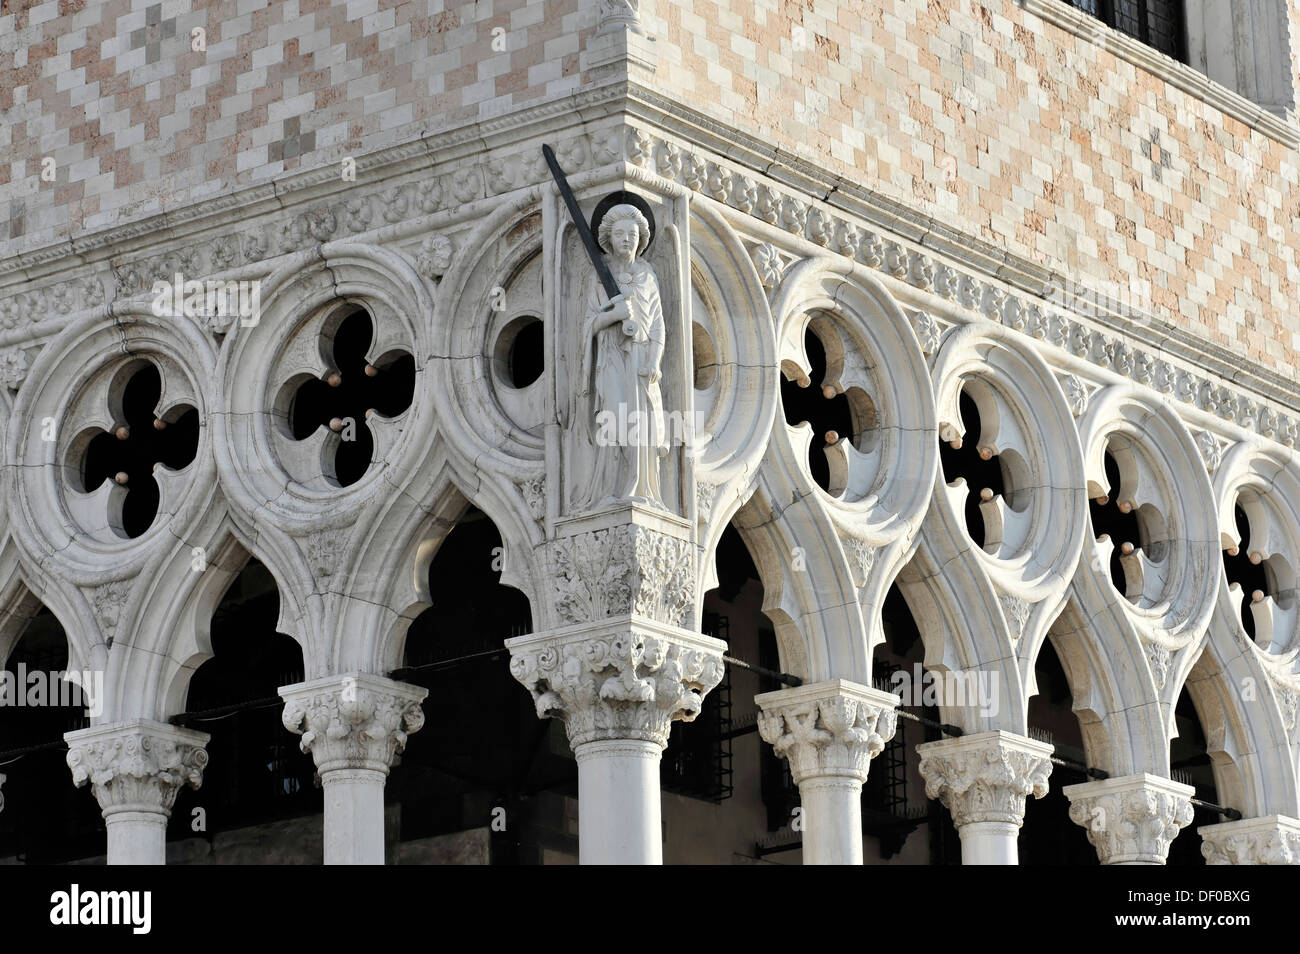 Gothic facade of the Palazzo Ducale palace, detailed view of the architecture, Piazza San Marco square, St. Mark's Square Stock Photo